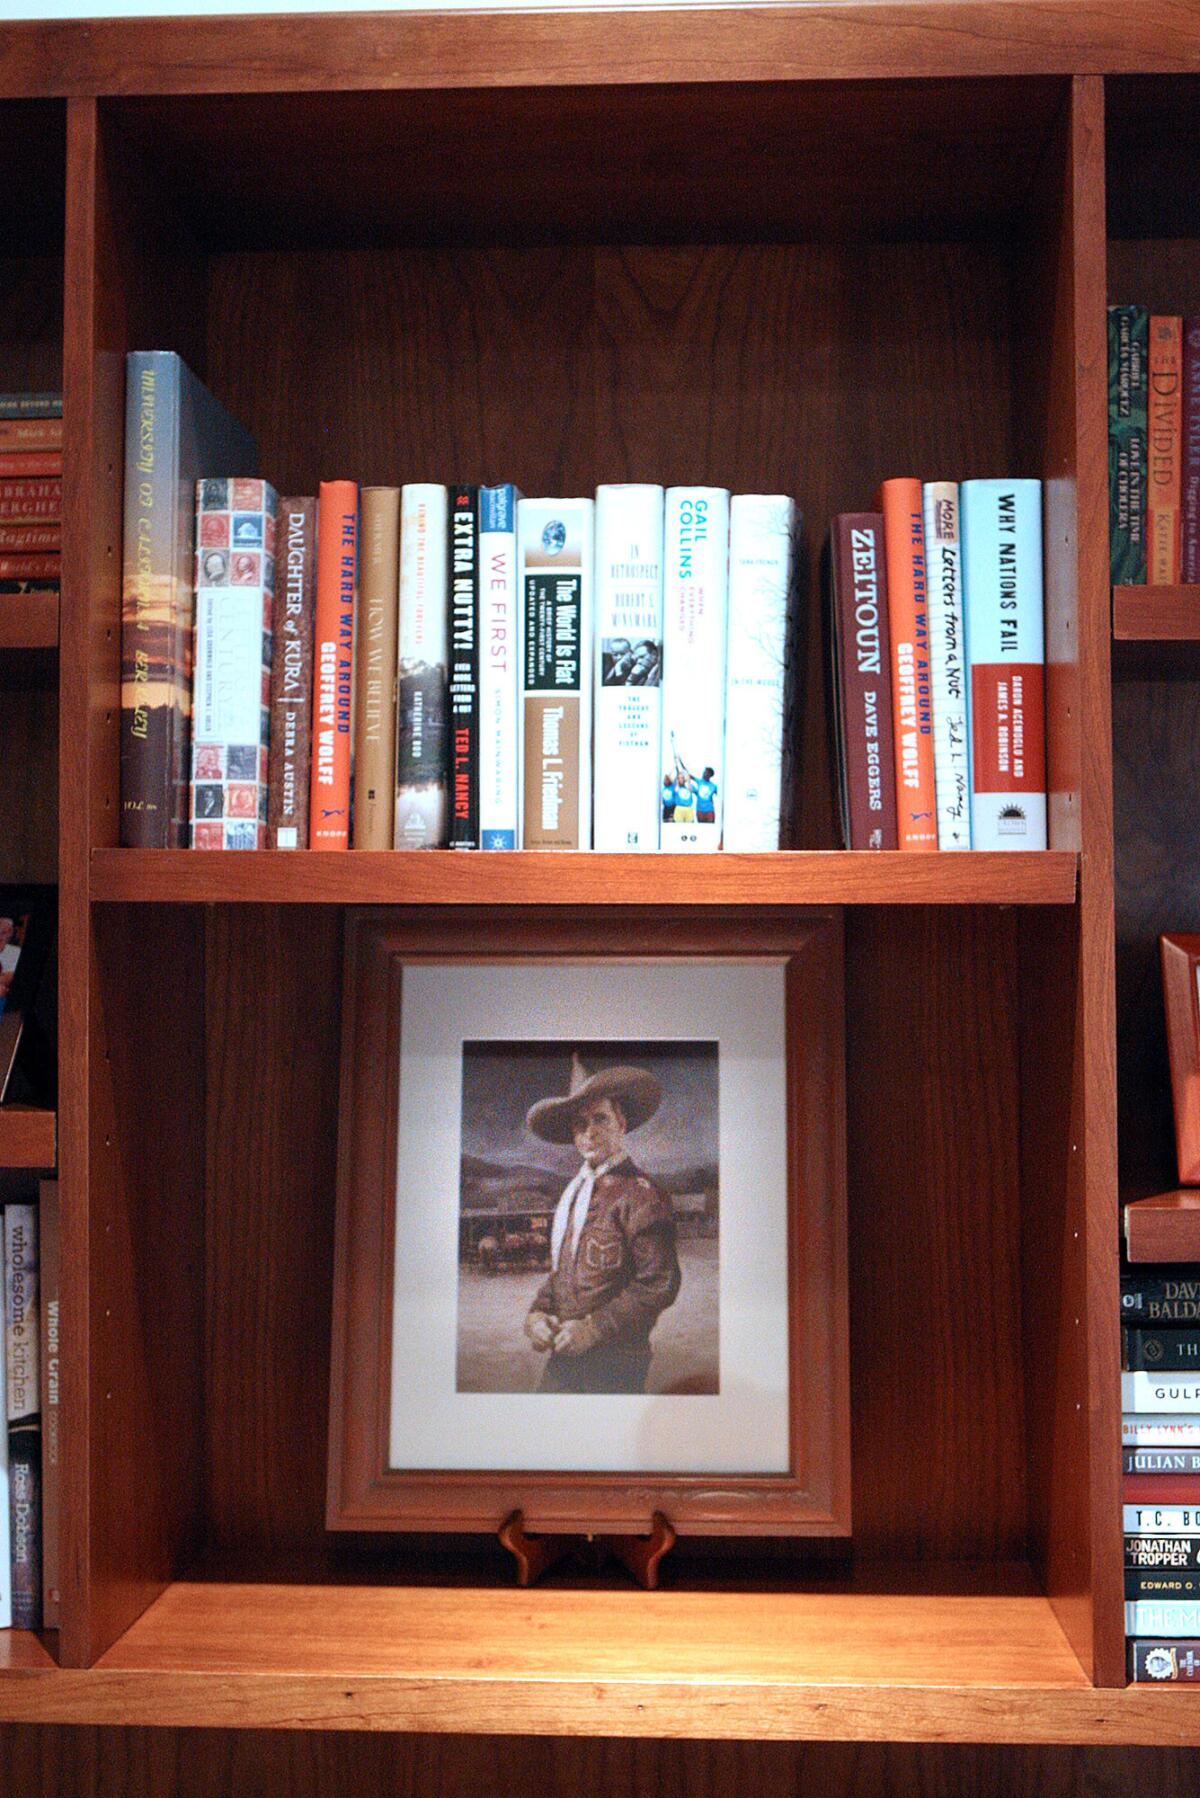 An image of cowboy actor Tim McCoy sits on a bookshelf of Janice Partyka and her husband Randy Hall, of La Canada Flintridge, in their home formerly owned by Inga Arvad and her husband Tim McCoy in La Canada Flintridge on Wednesday, October 23, 2013. Arvad had relationships with Adolf Hitler, and a young John F. Kennedy, and McCoy was a cowboy circus performer and an actor. Parkyka and her husband have become fascinated with their home's past and have done some historical digging to learn more about Arvad and McCoy.